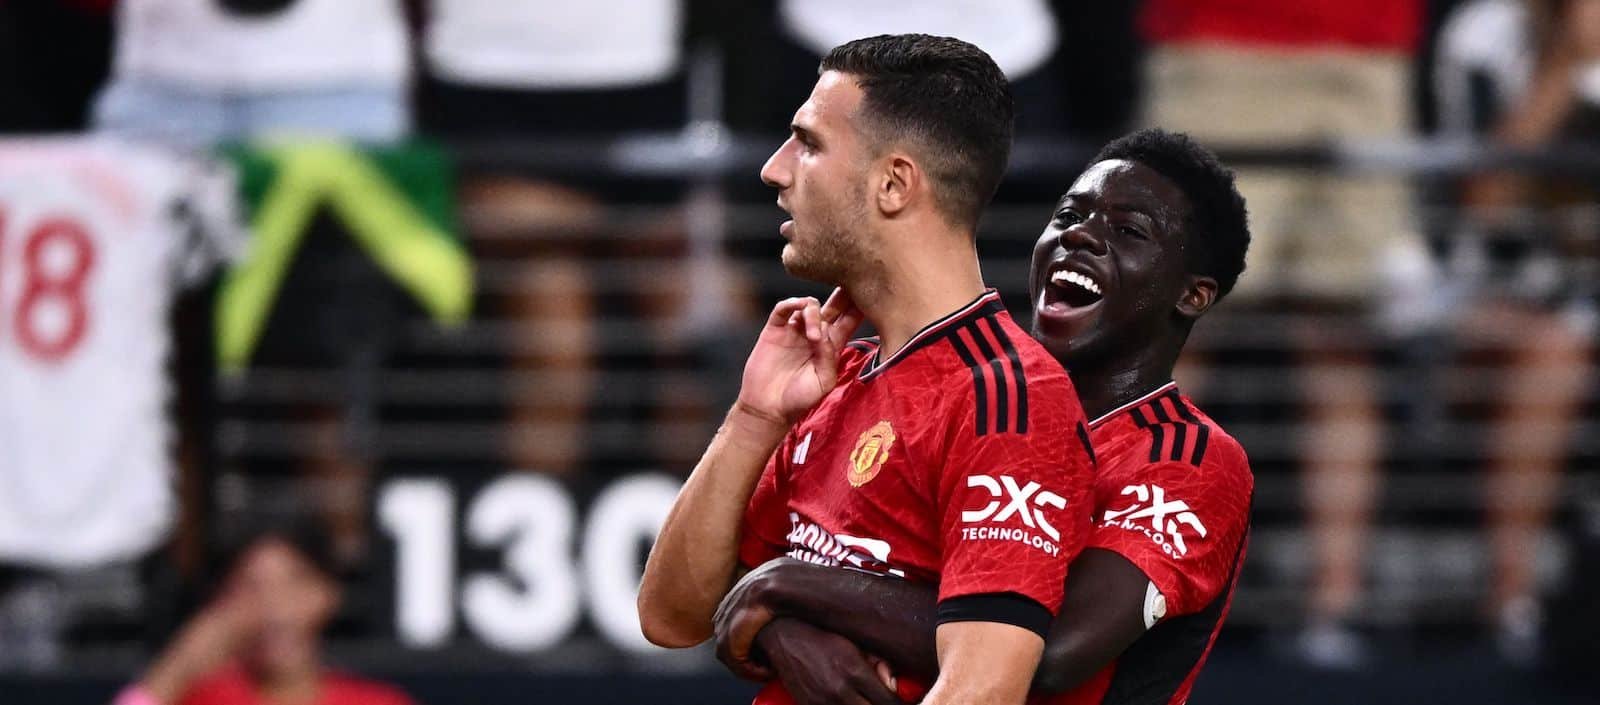 Diogo Dalot left Newport County players in awe during the FA Cup clash with Bruno Fernandes also earning respect – Man United News And Transfer News